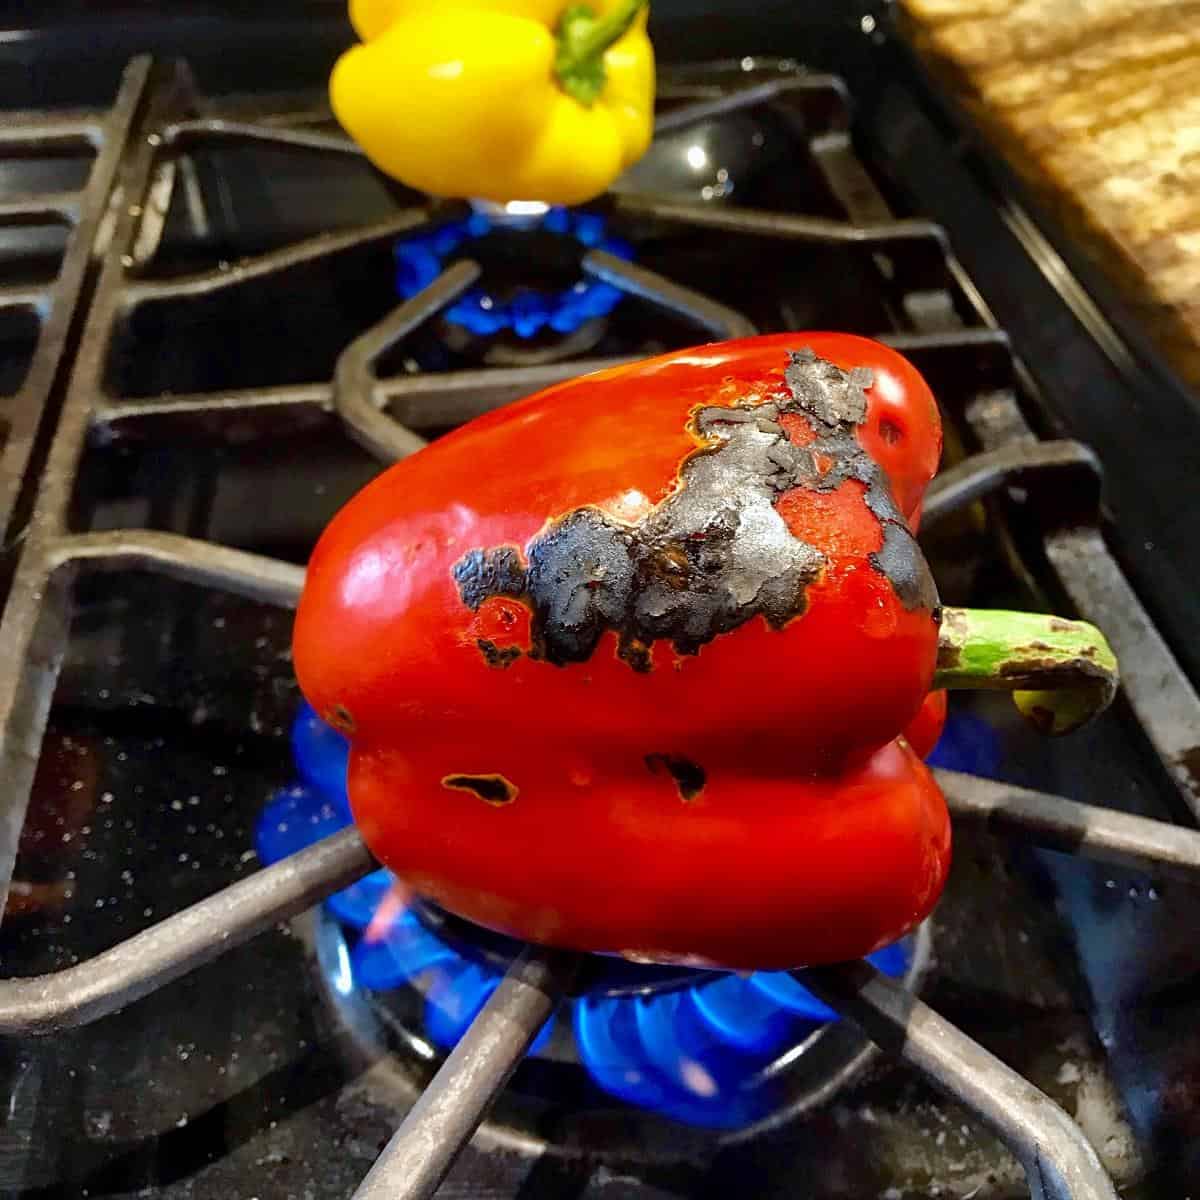 A pepper on a gas stove burner.